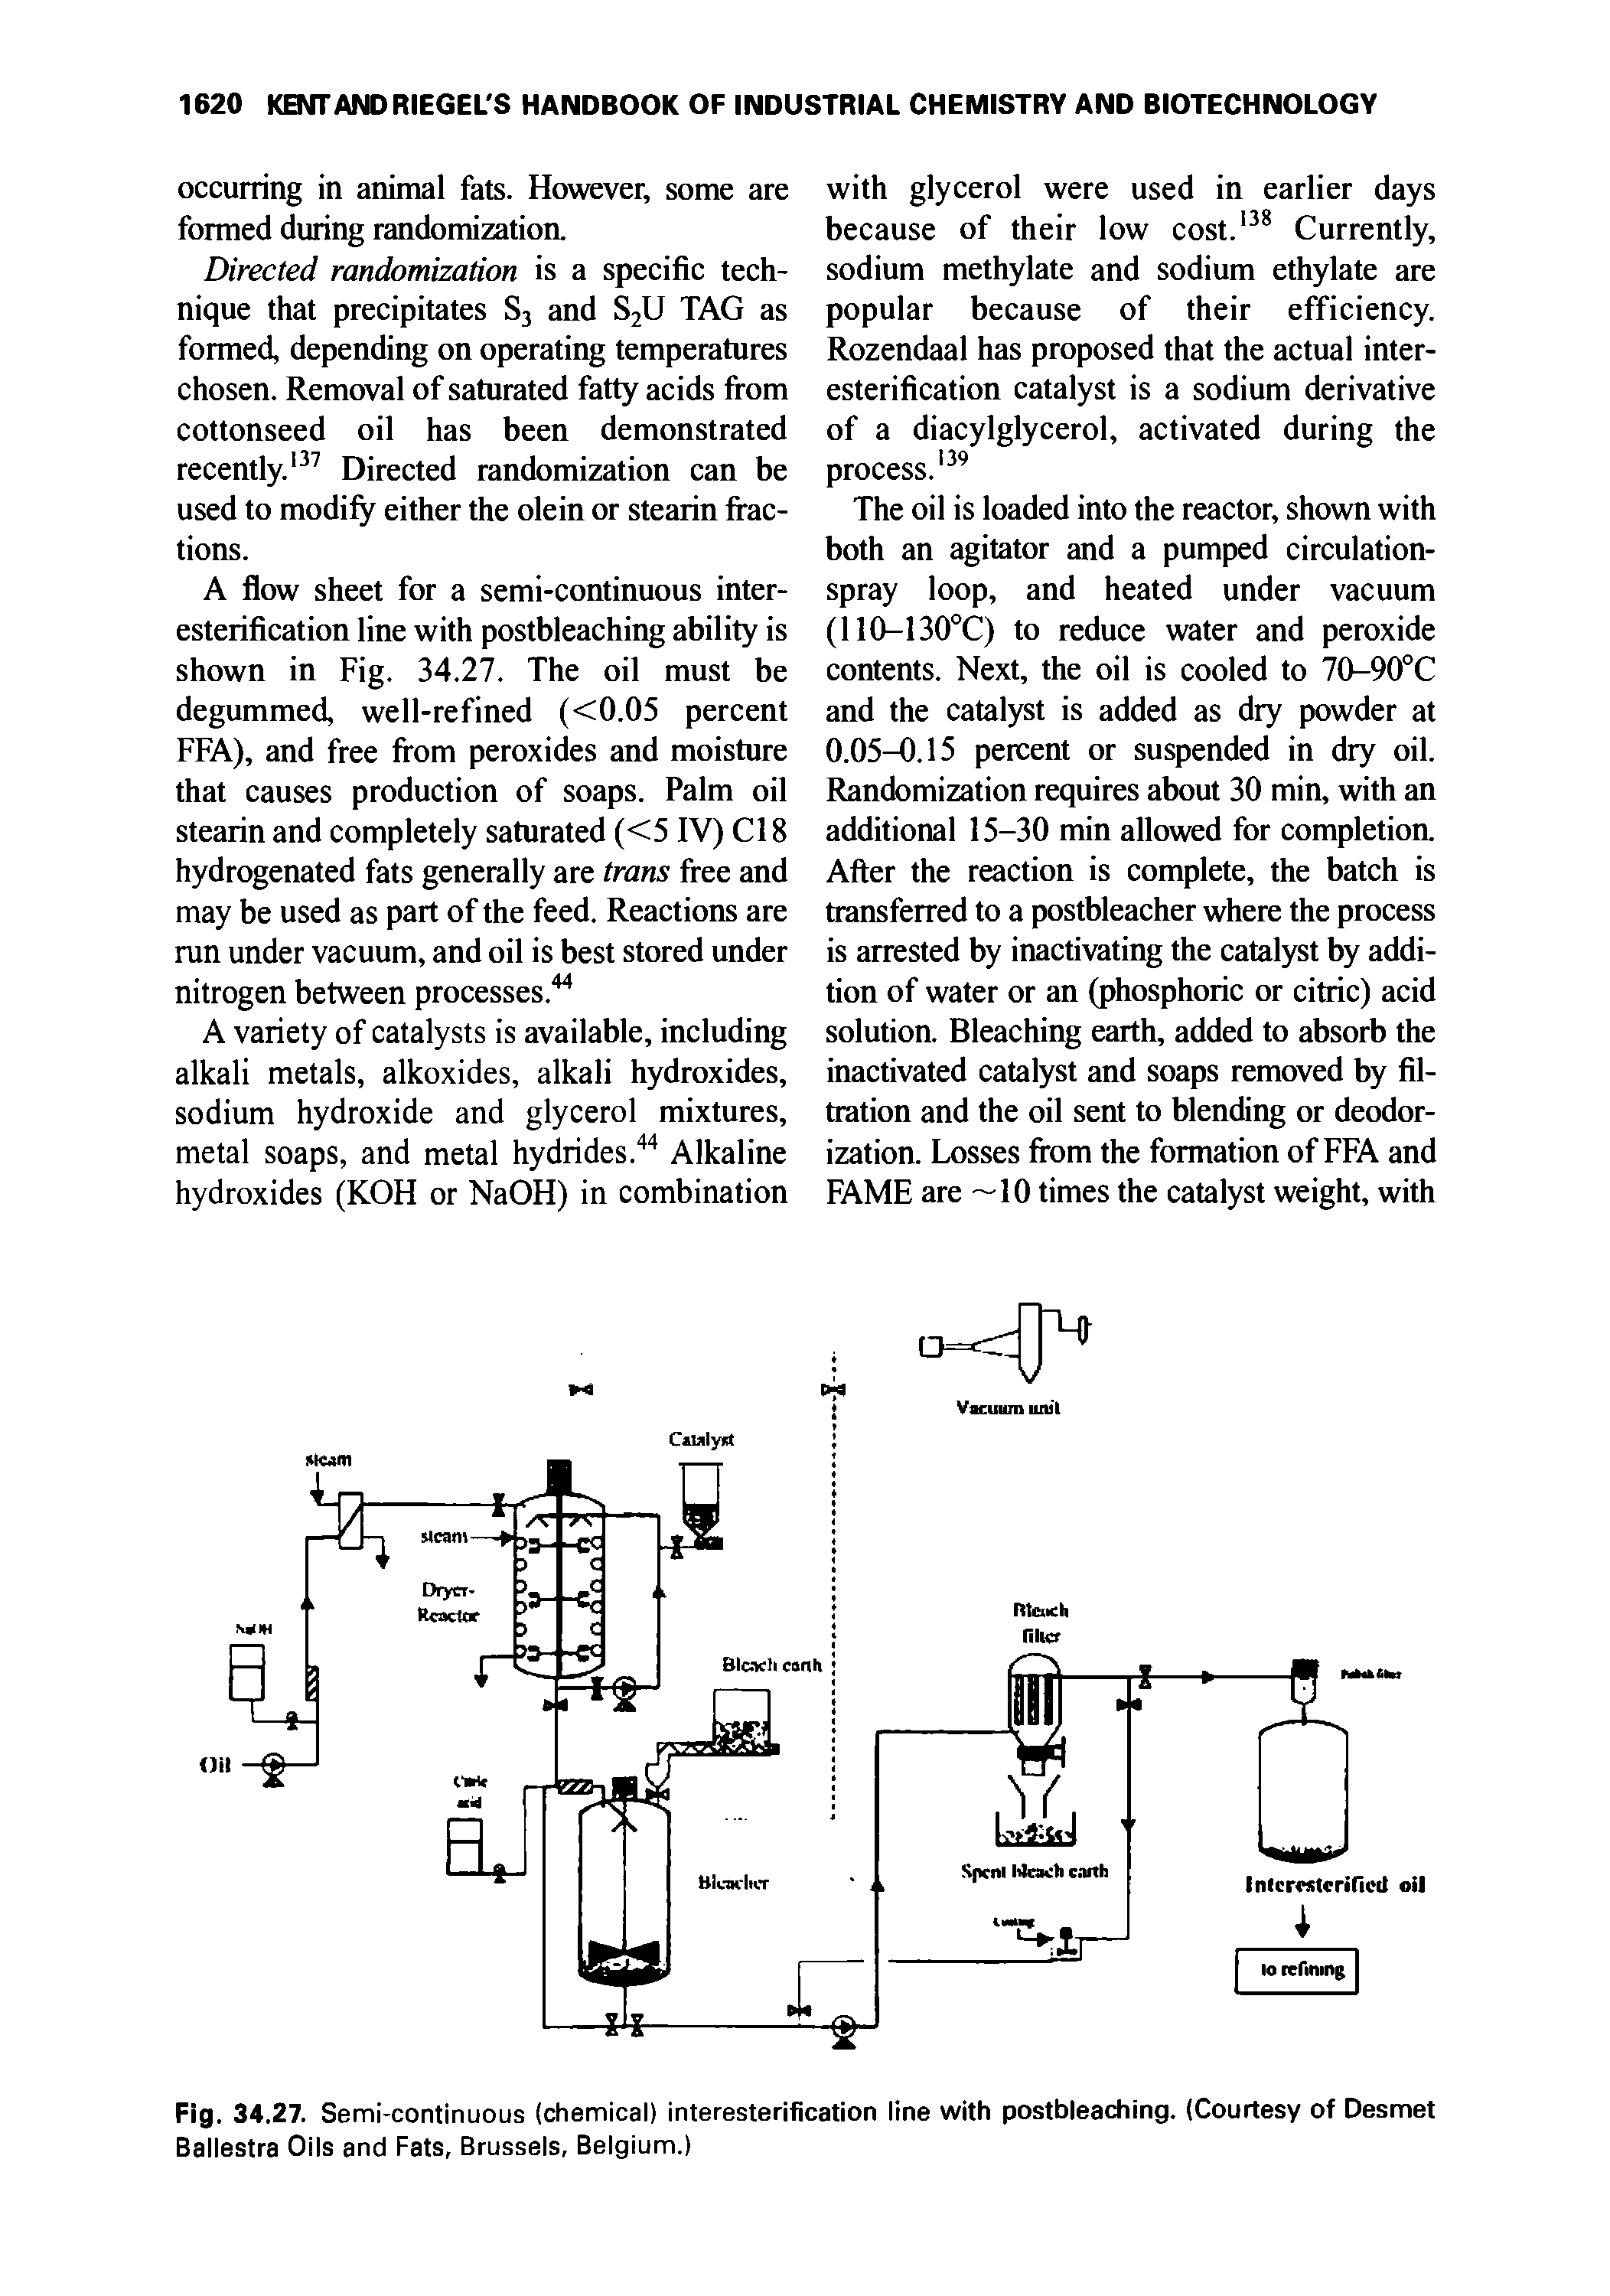 Fig. 34.27. Semi-continuous (chemical) interesterification line with postbleaching. (Courtesy of Desmet Ballestra Oils and Fats, Brussels, Belgium.)...